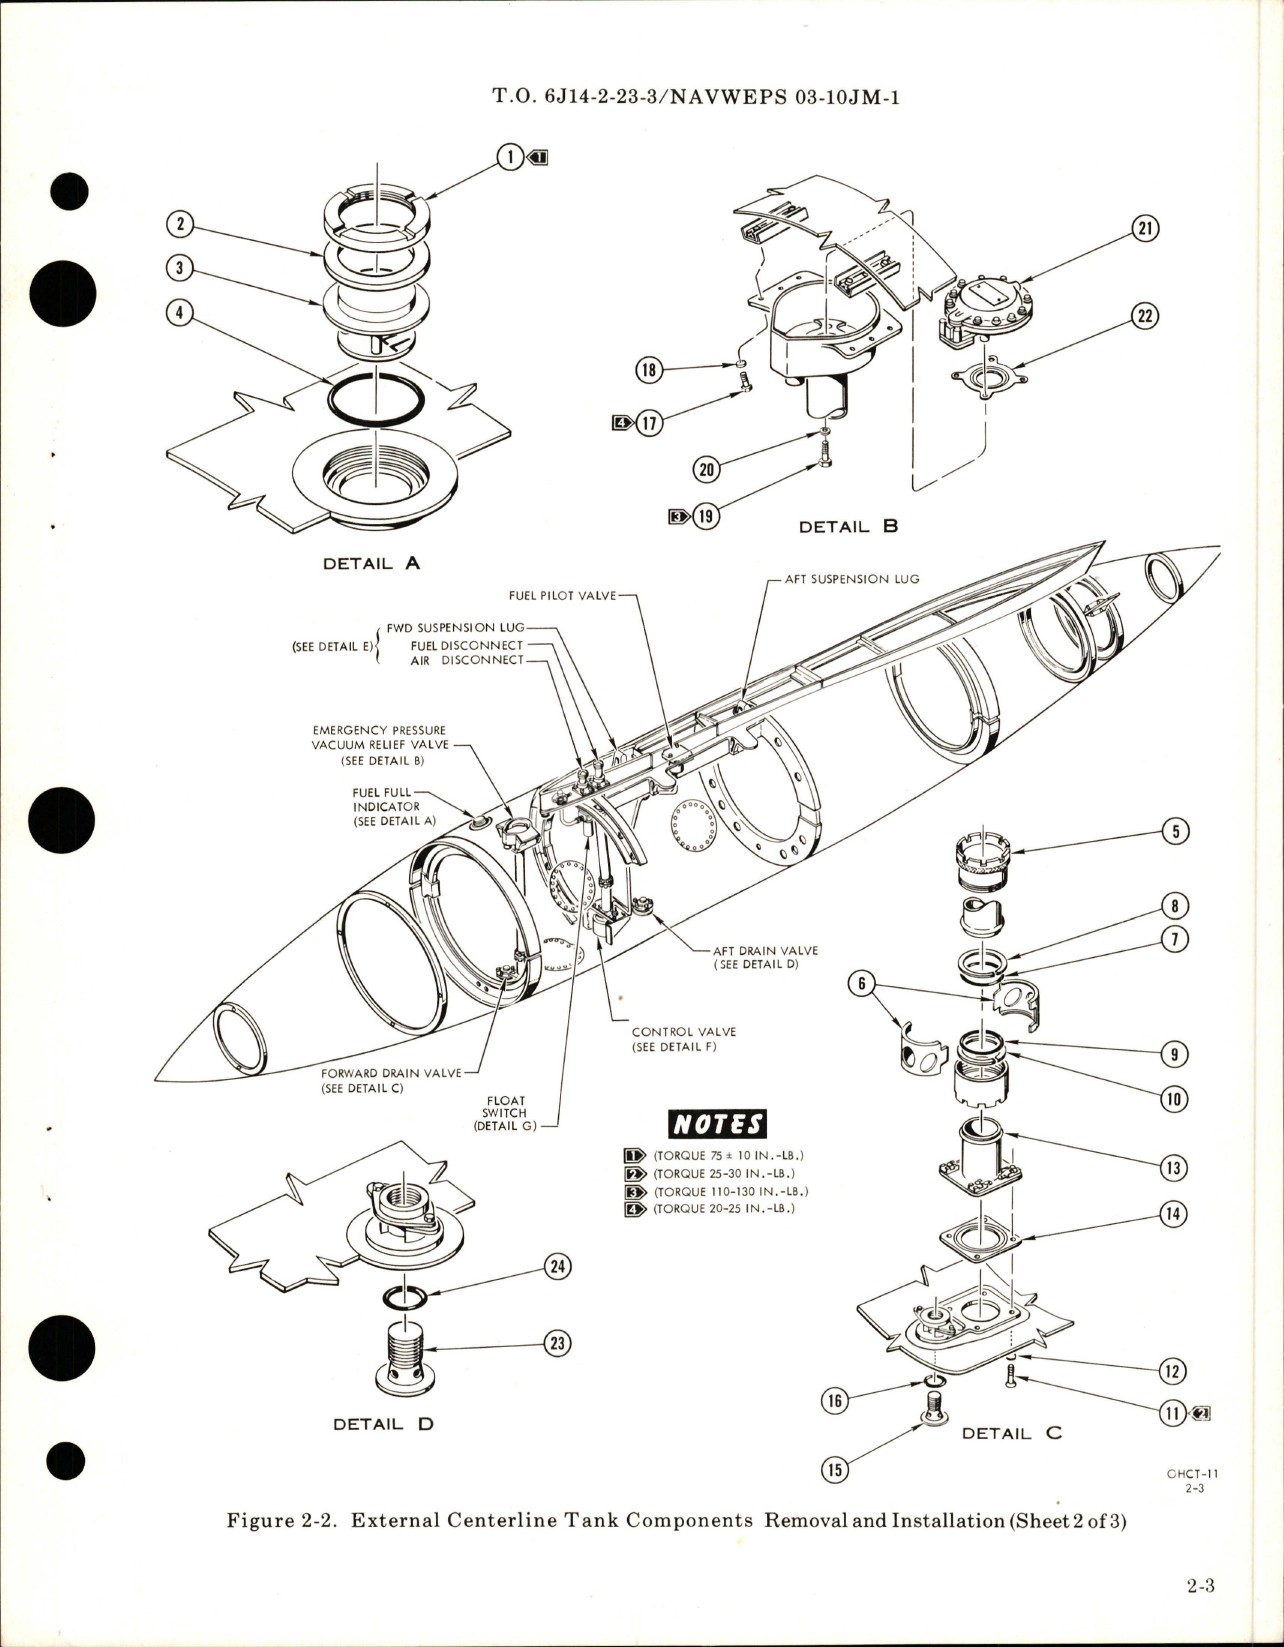 Sample page 9 from AirCorps Library document: Overhaul Manual for External Centerline Fuel Tank